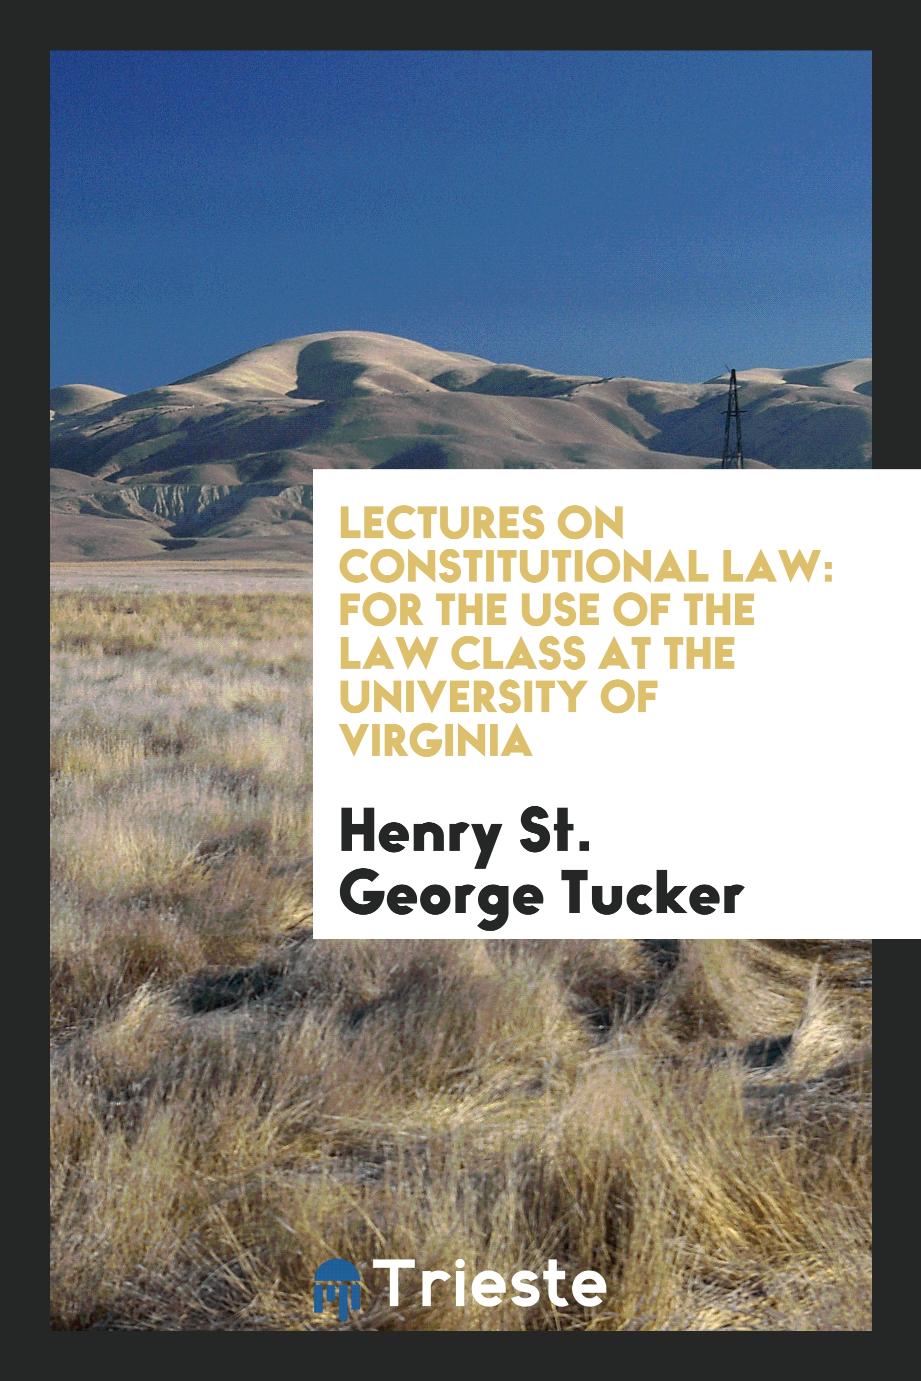 Lectures on constitutional law: for the use of the law class at the University of Virginia